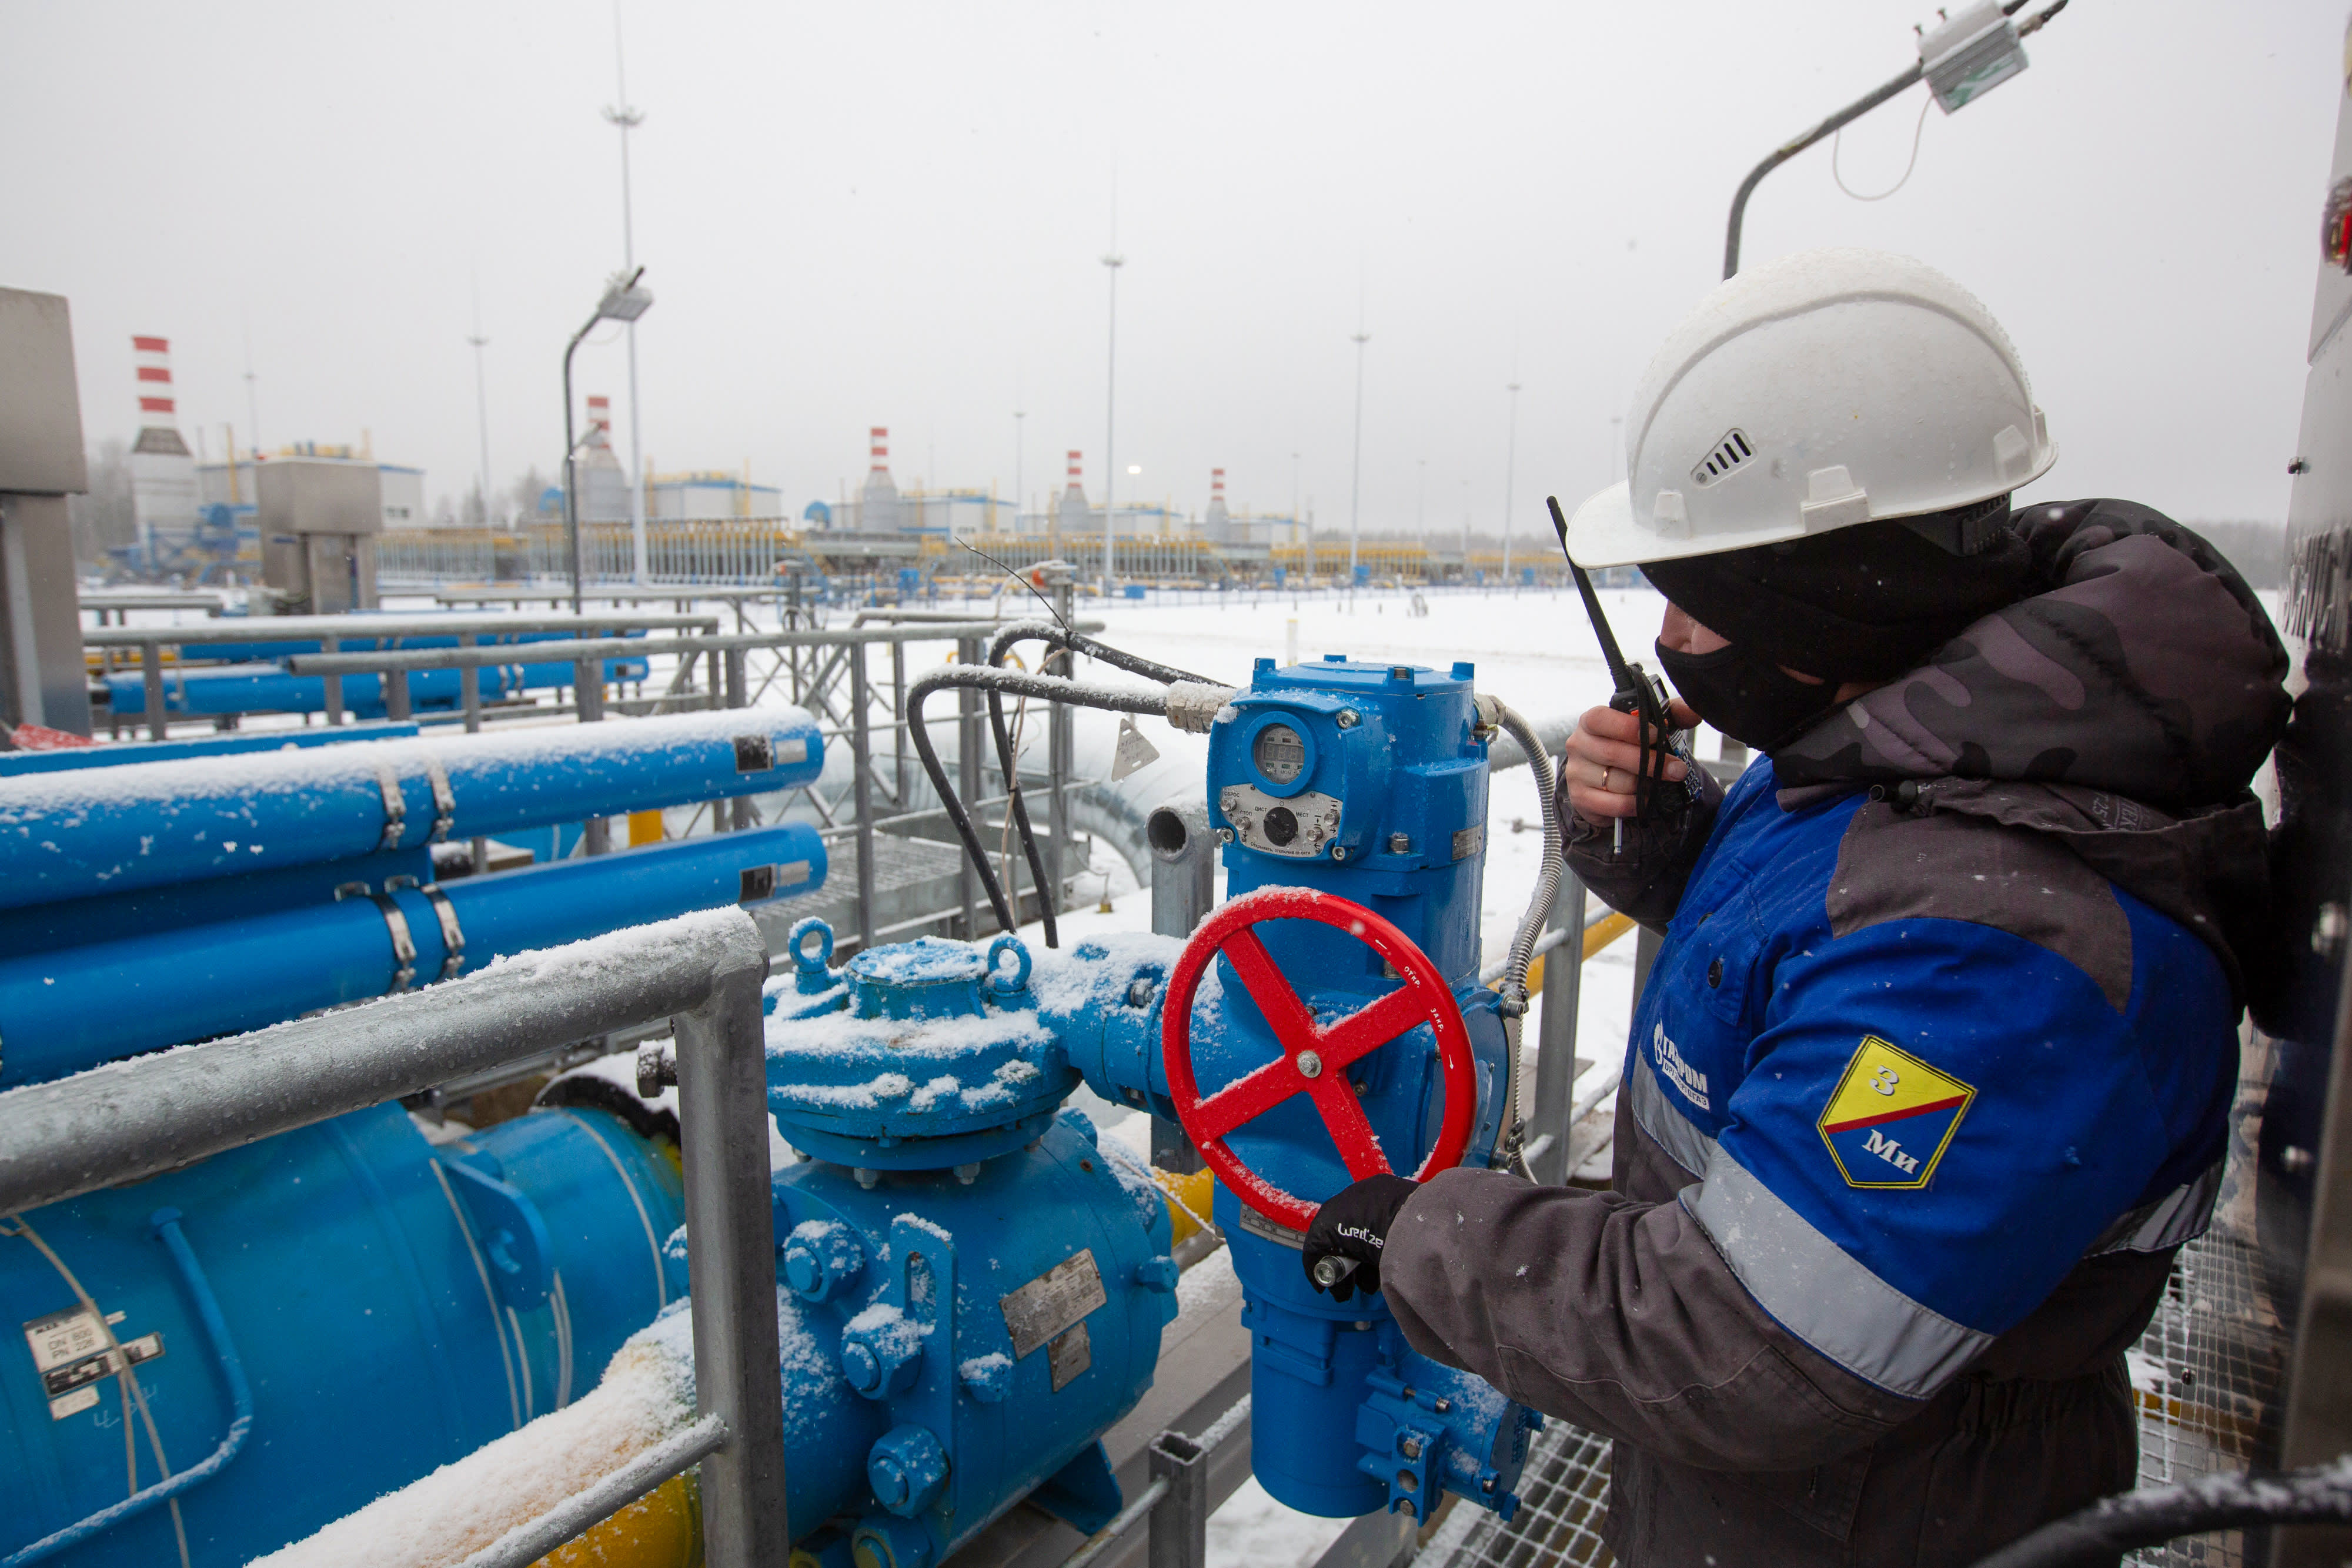 What if Russia turns off the gas? Europe assesses its options as fears mount over Ukraine crisis – CNBC